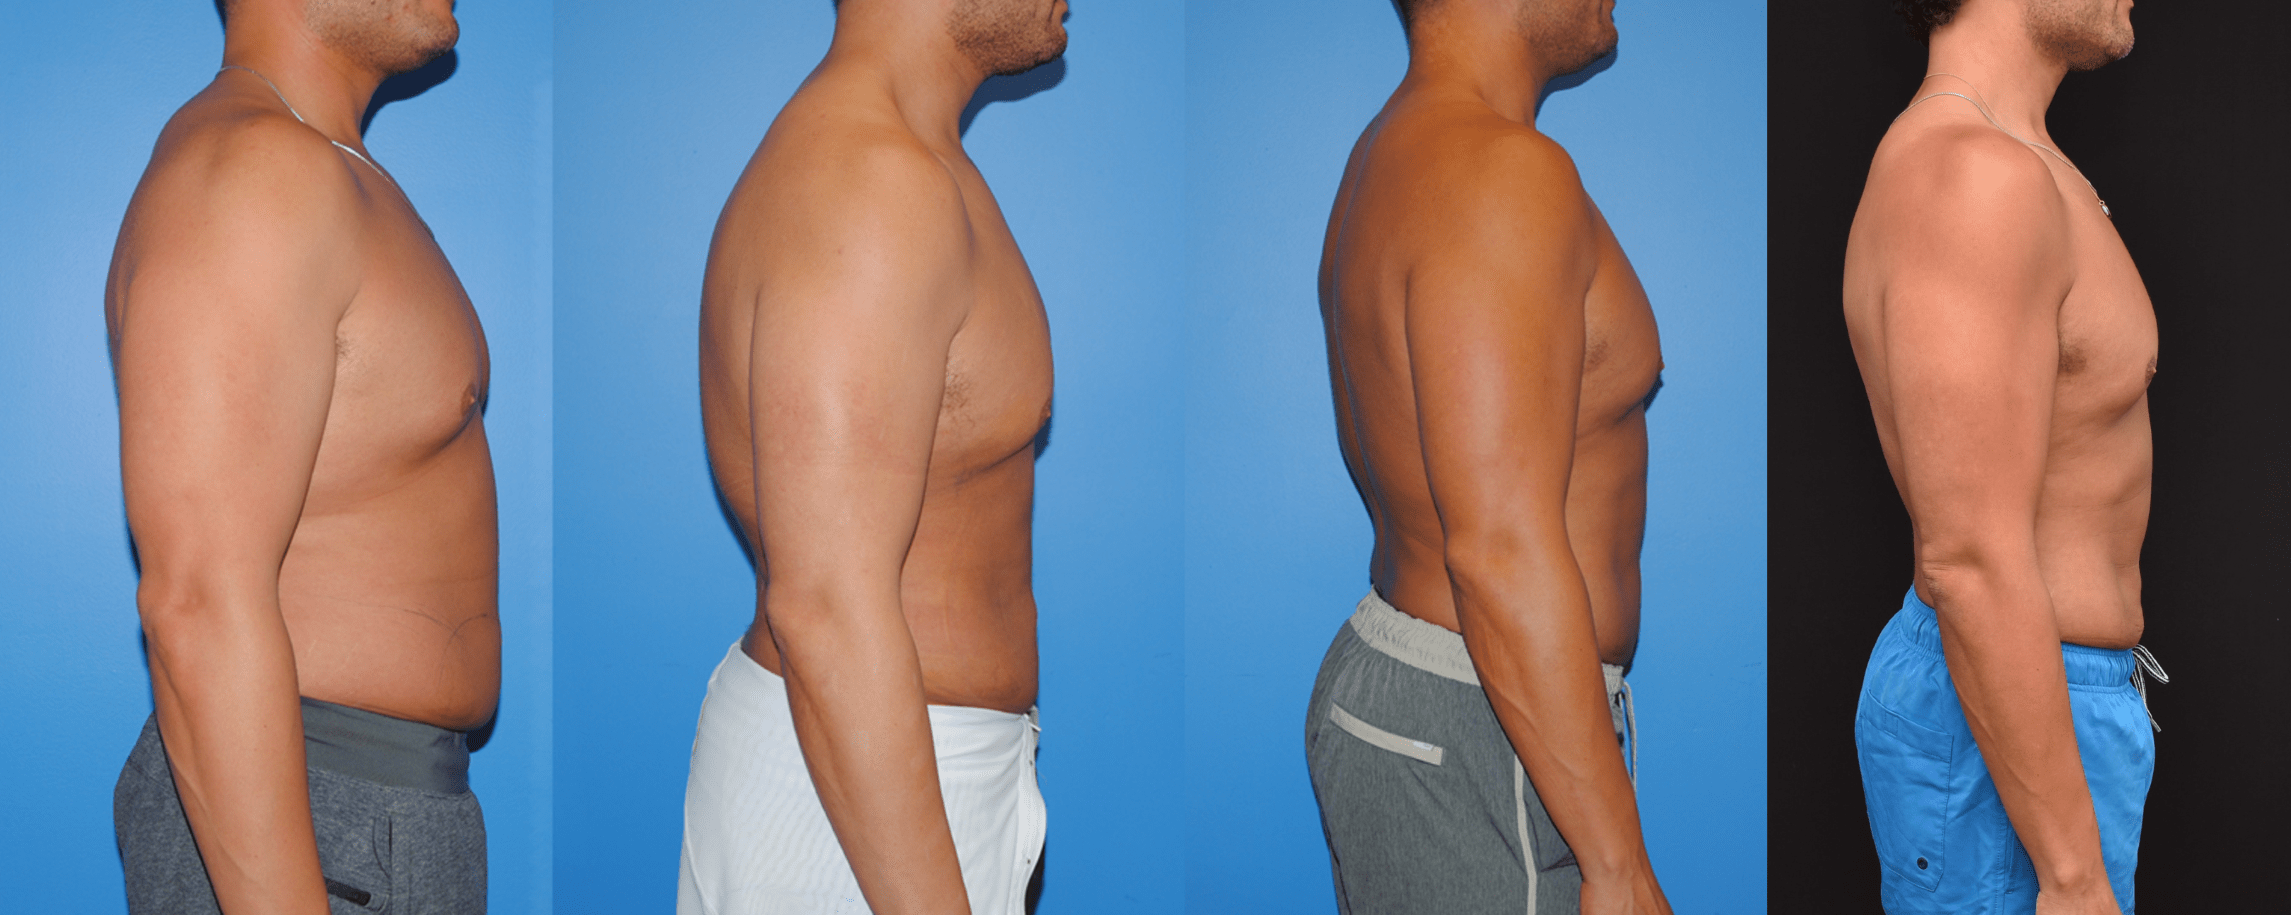 Liposuction of the Back, Abdomen, and Flanks